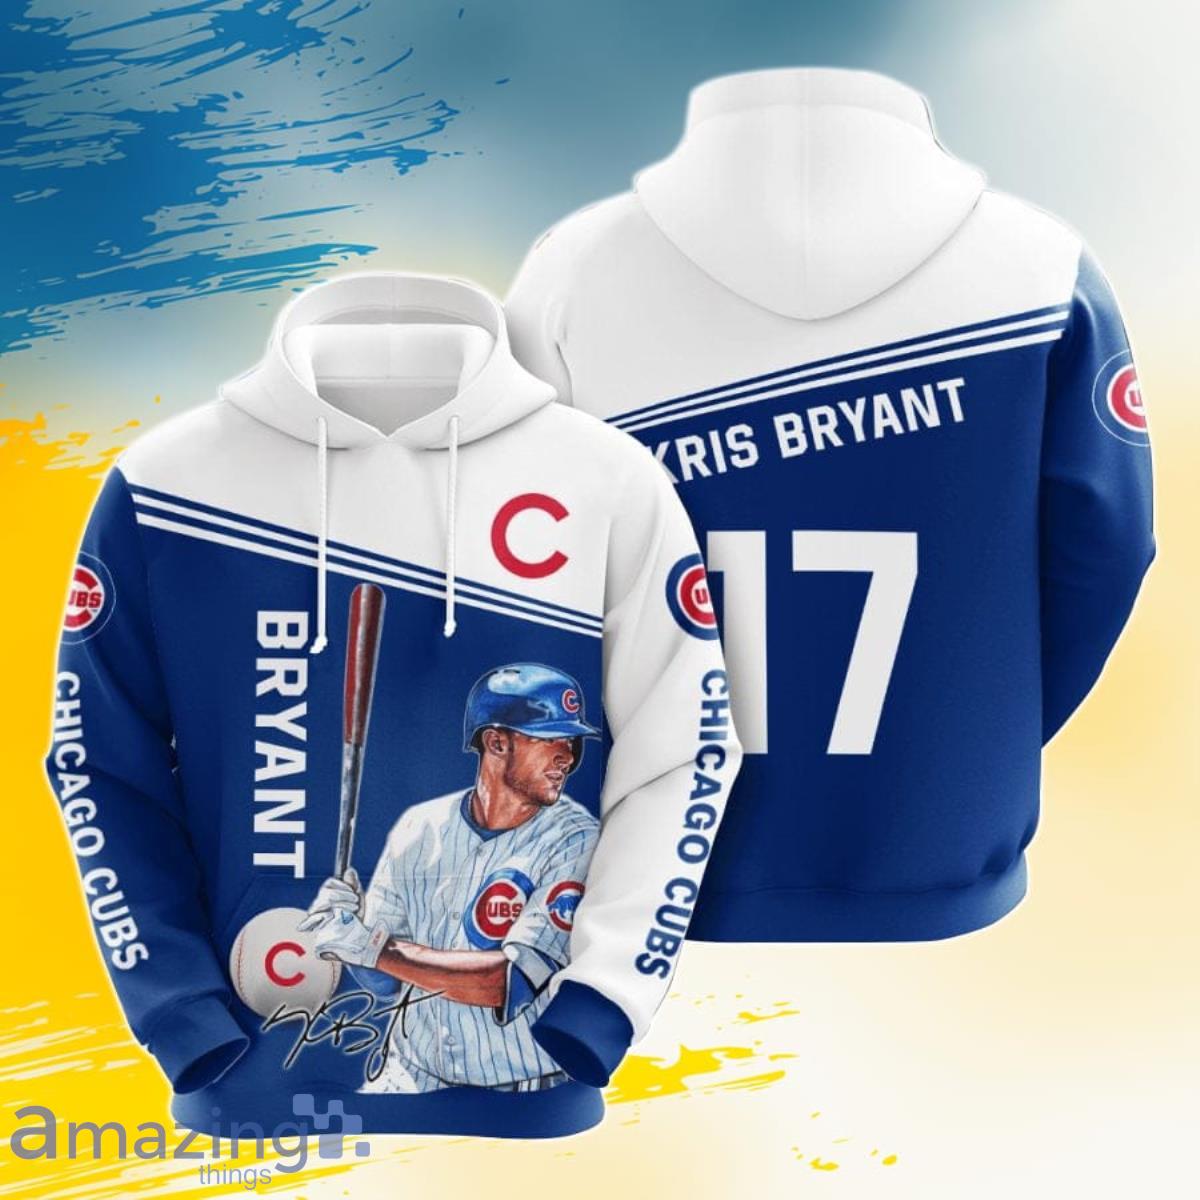 kris bryant chicago cubs jersey